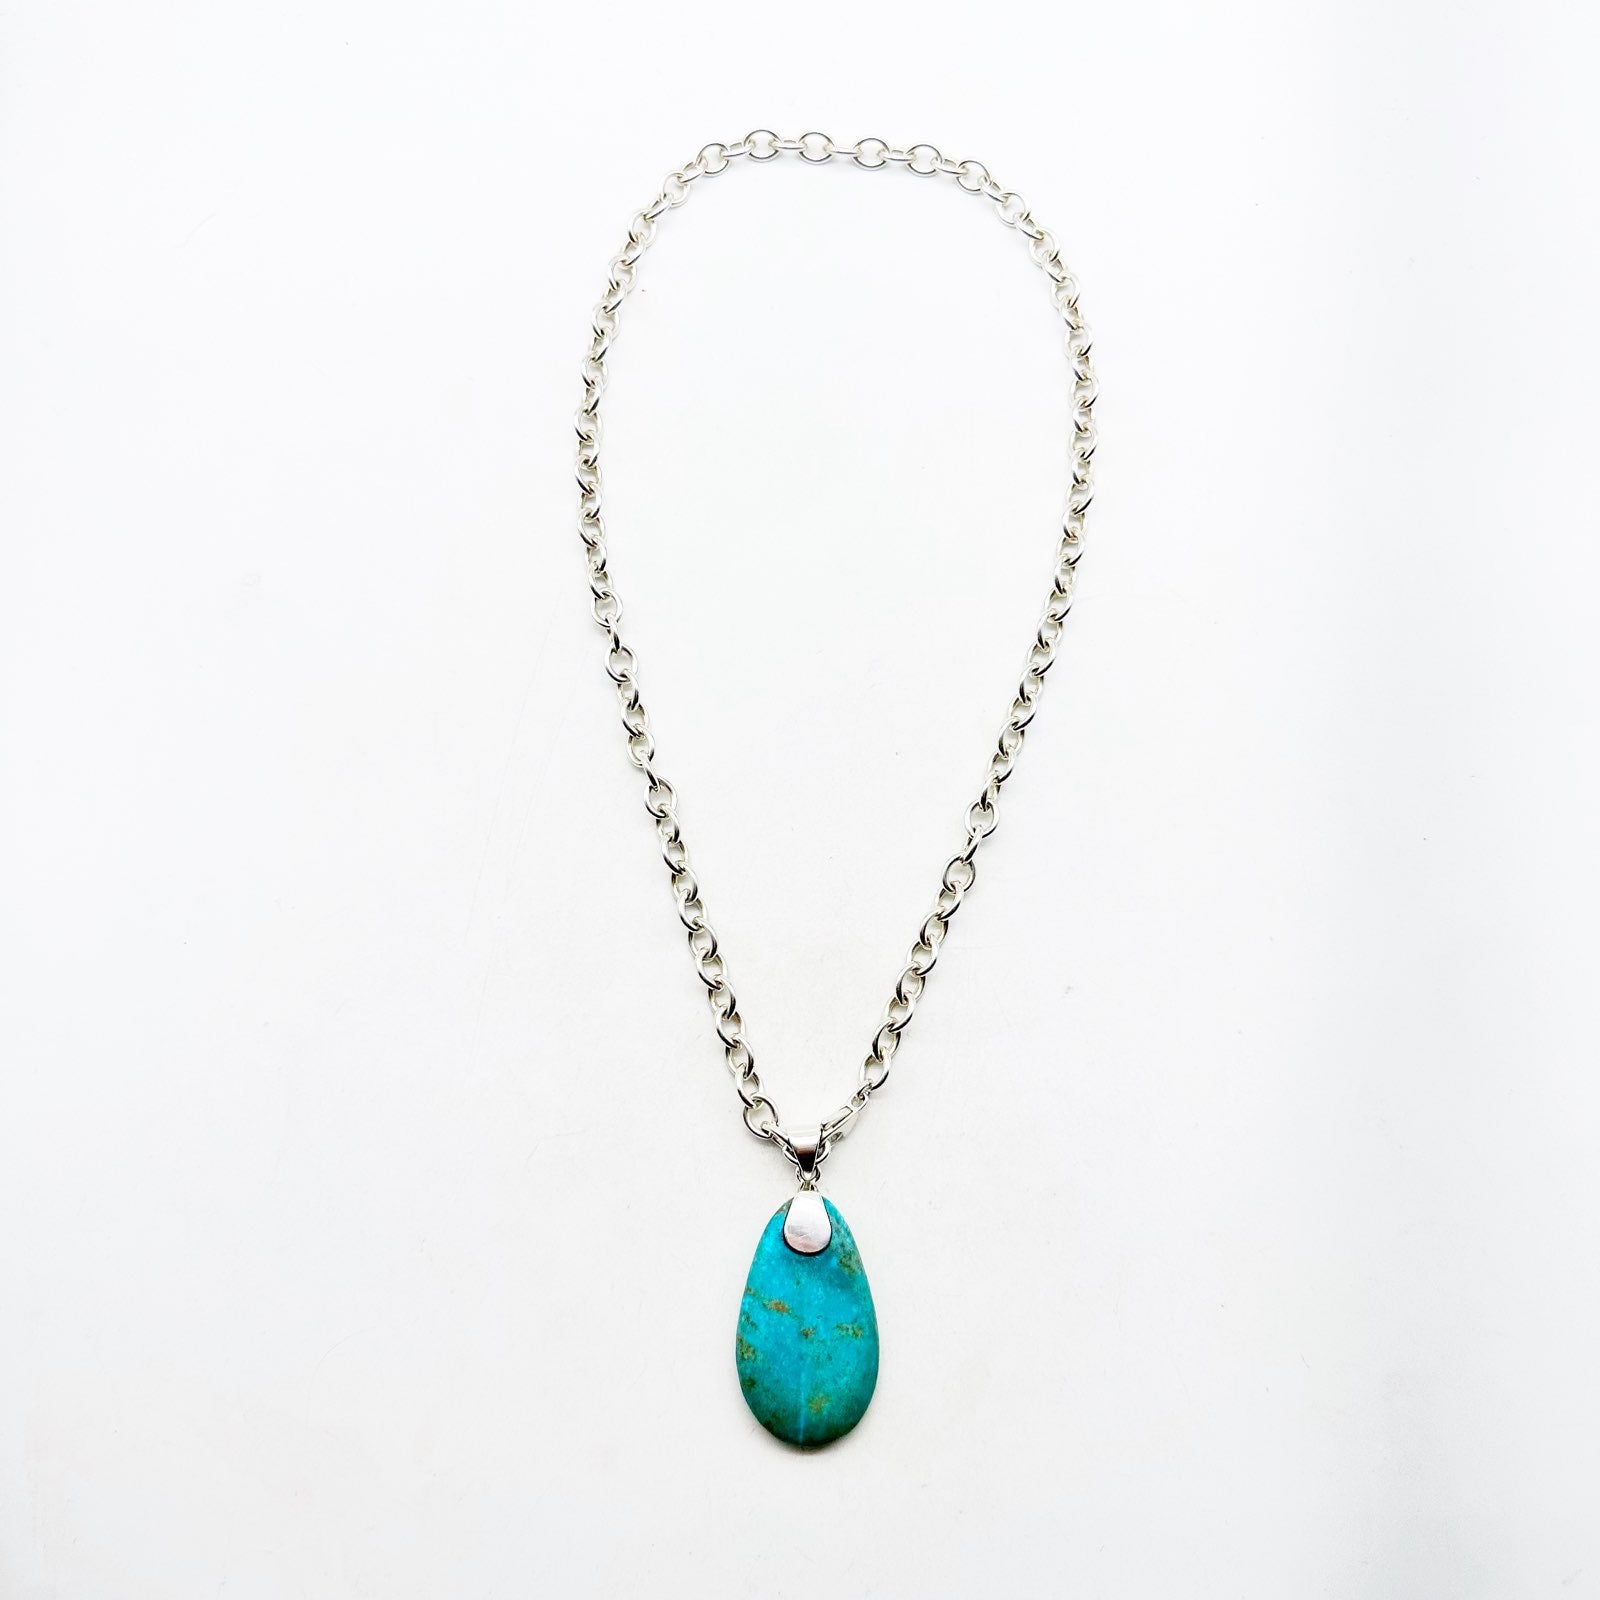 TURQUOISE STONE ON SILVER CABLE CHAIN